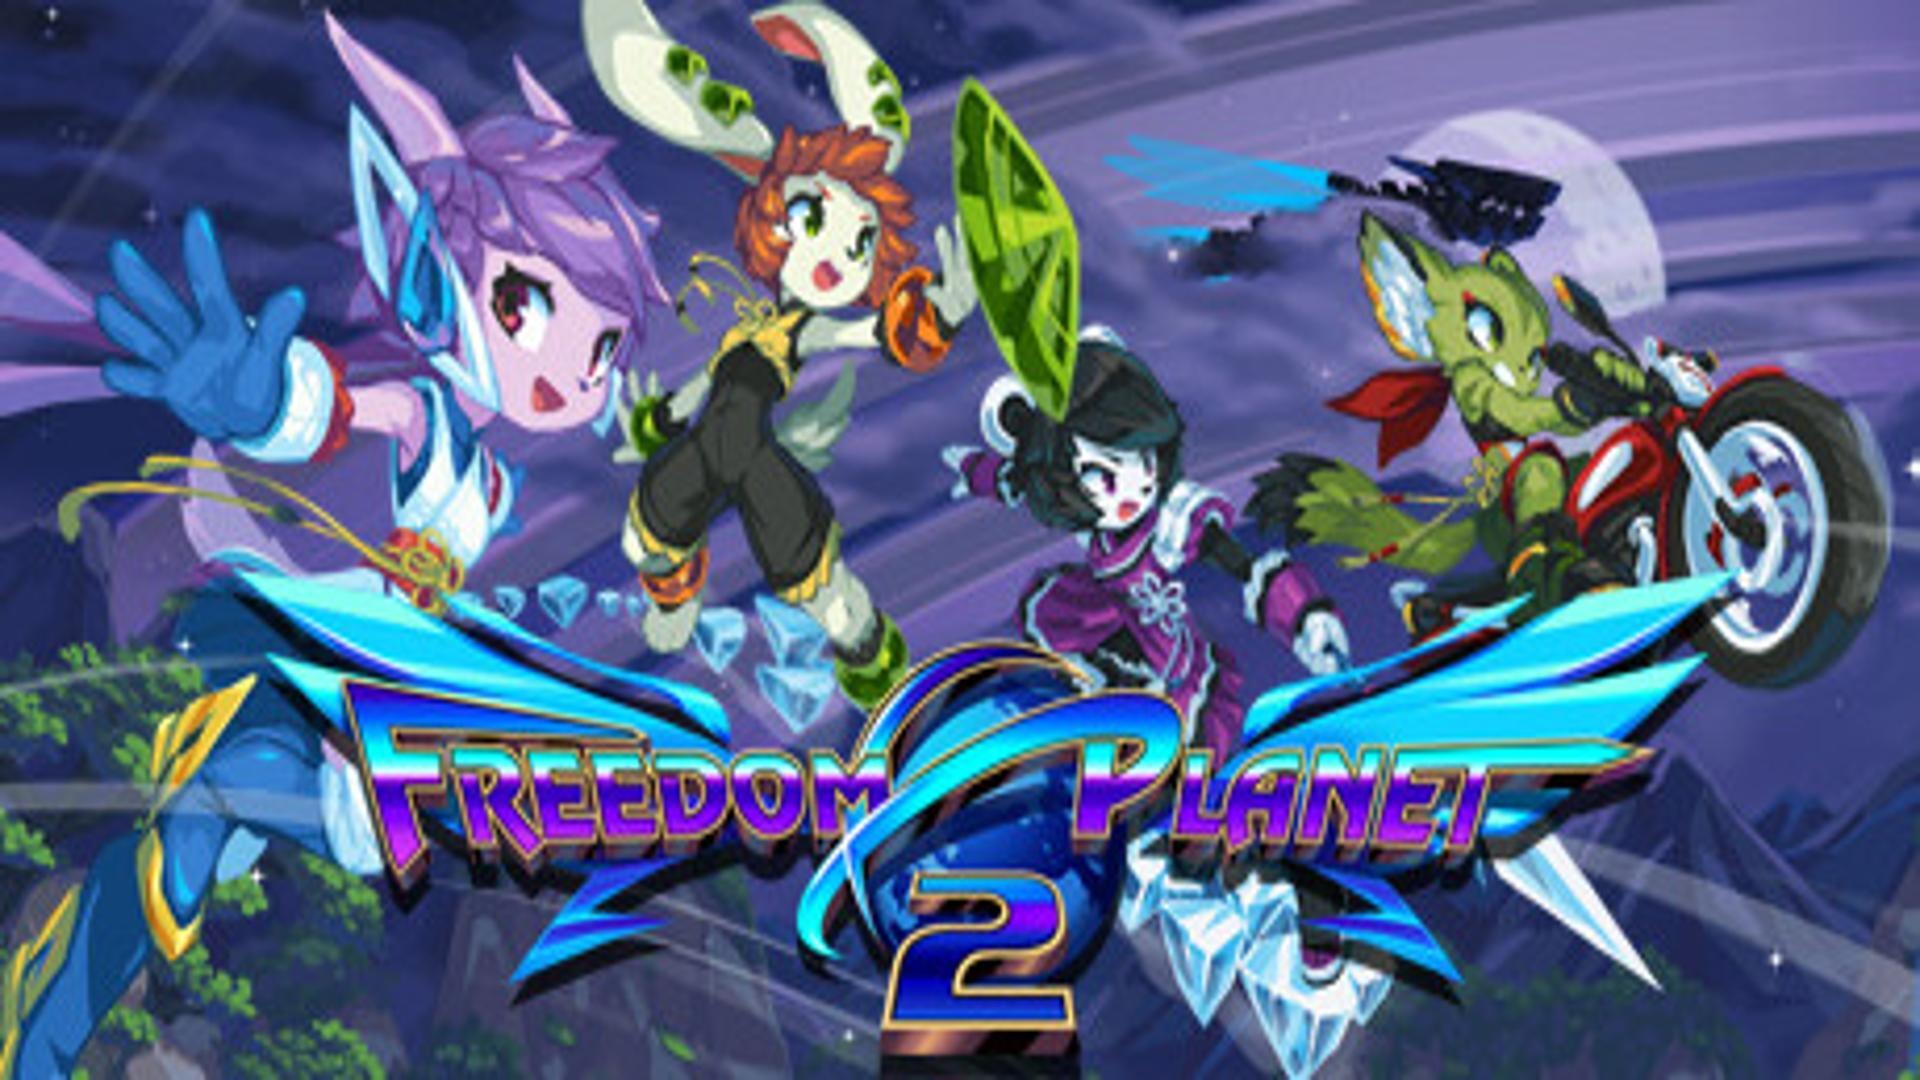 Freedom Planet 2 – Free Download (Build 11181808)